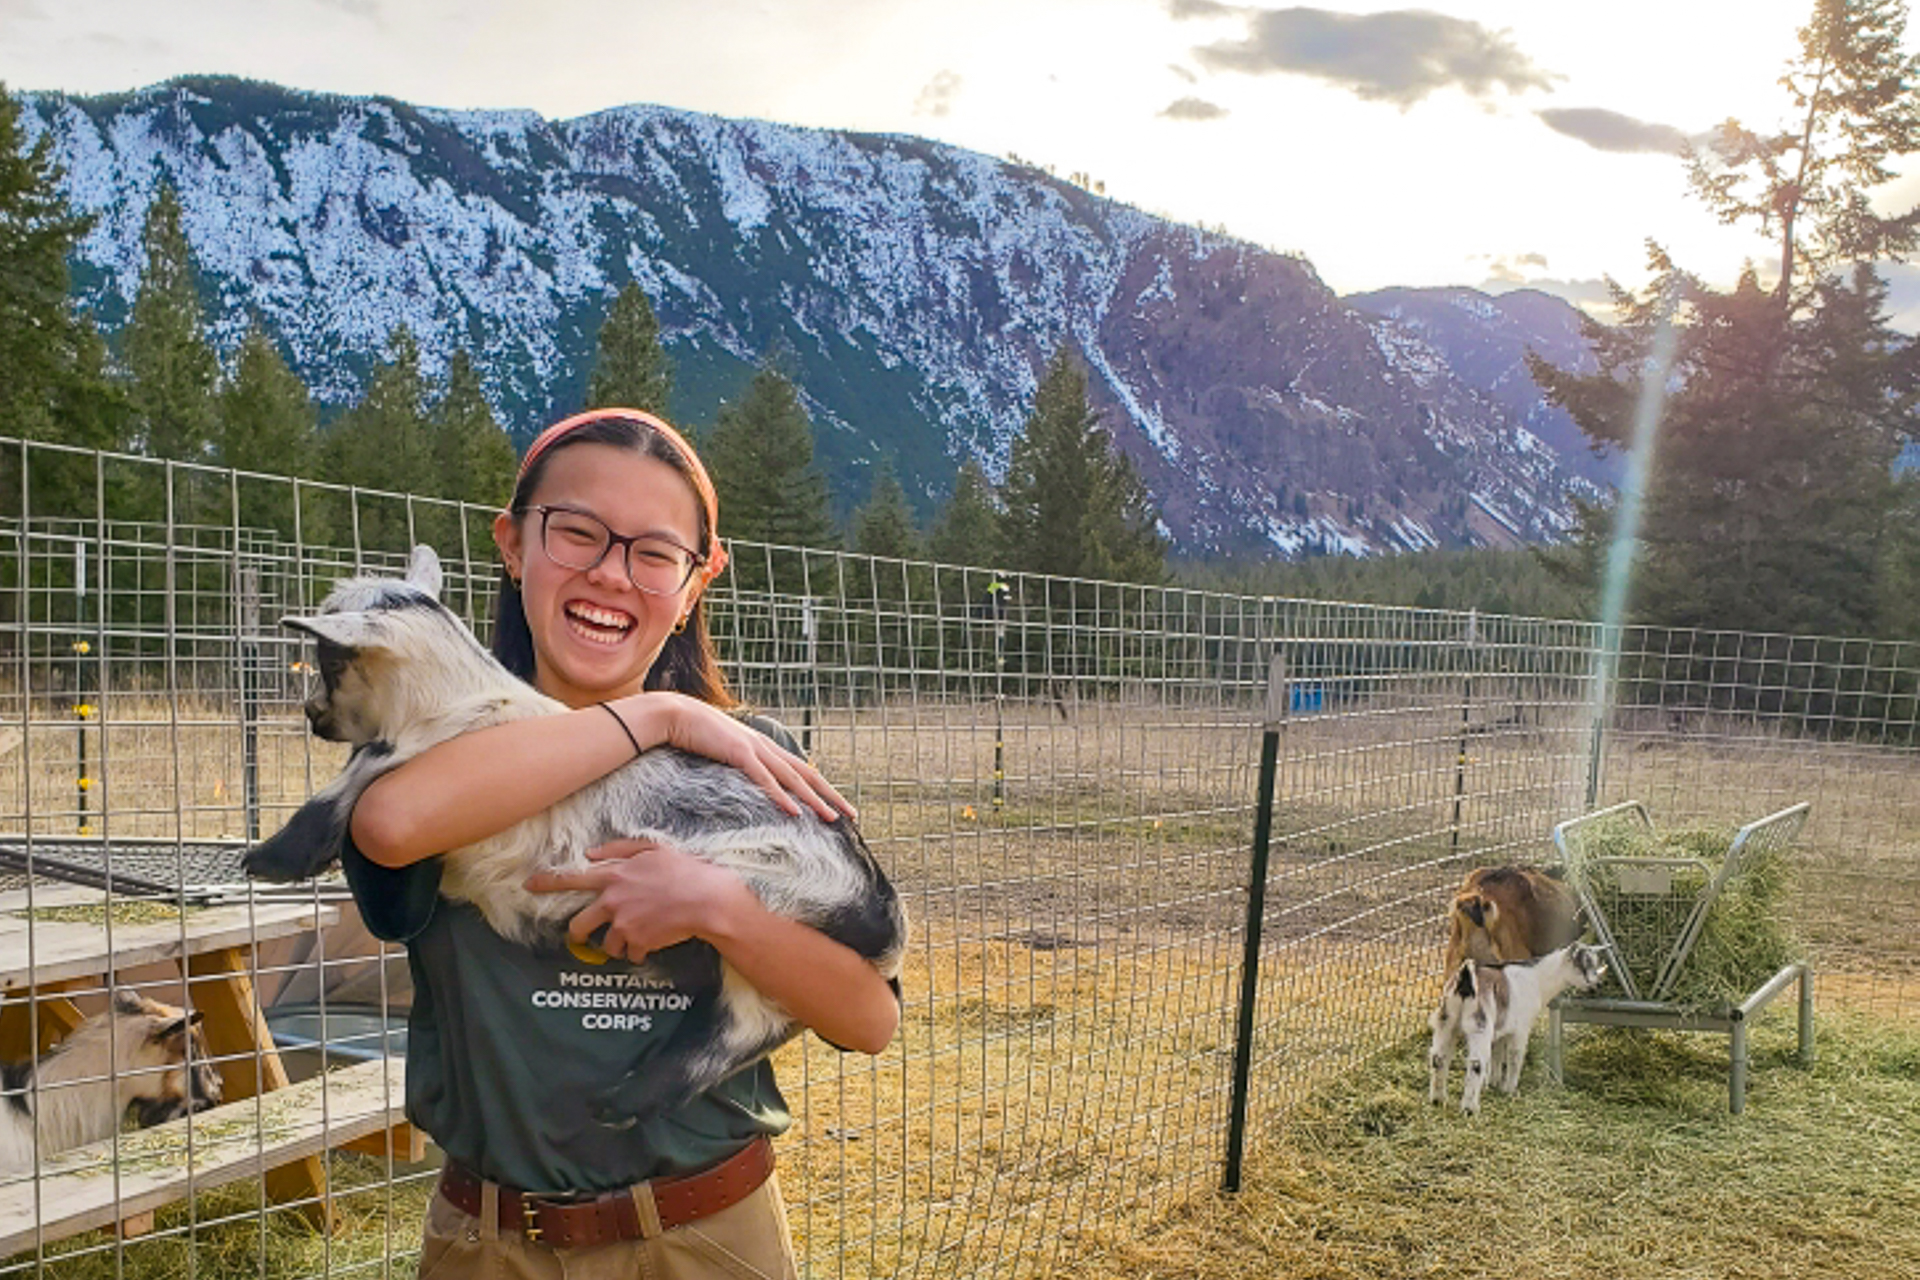 Mass Audubon's new coordinator for the Teen Adventure Trips program, Julia Drennan, stands inside a fenced-in enclosure with beautiful snow-dusted mountains in the background, She is holding a goat in her arms and smiling and is wearing a t-shirt for the Montana Conservation Corps.